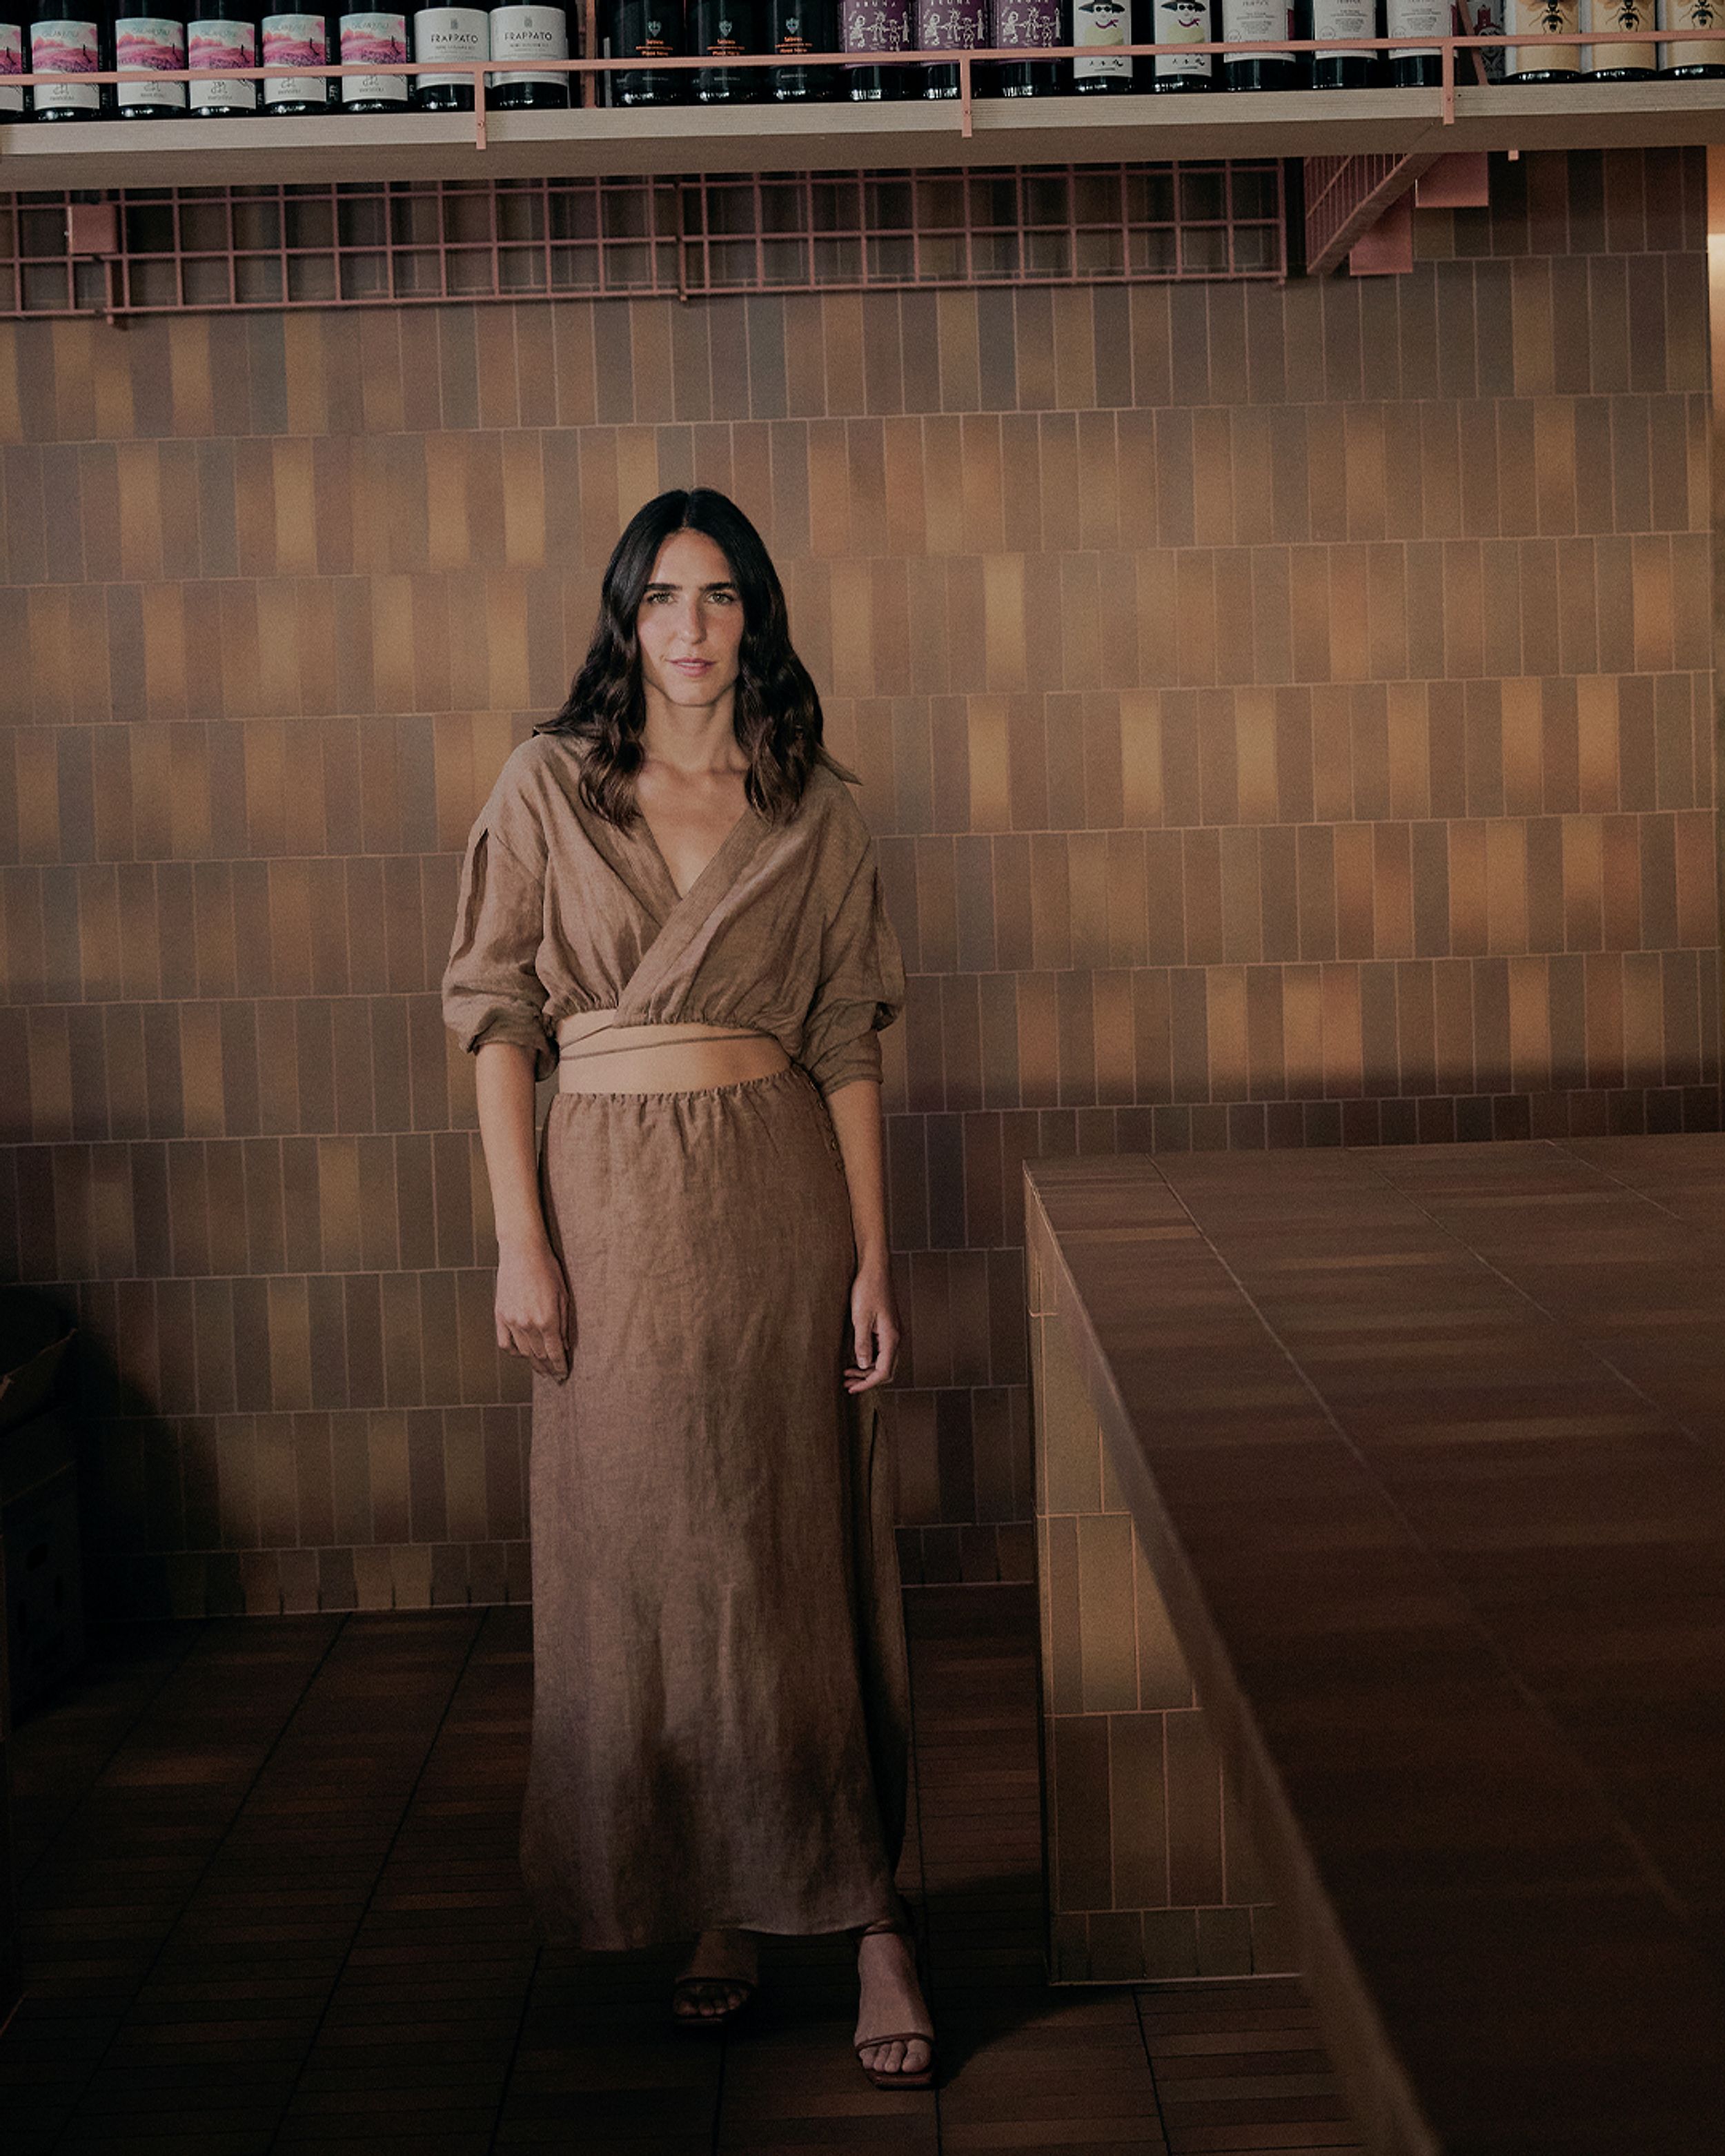 Bianca Marchi posing in front of a brown tiled wall wearing a brown linen shirt and maxi skirt